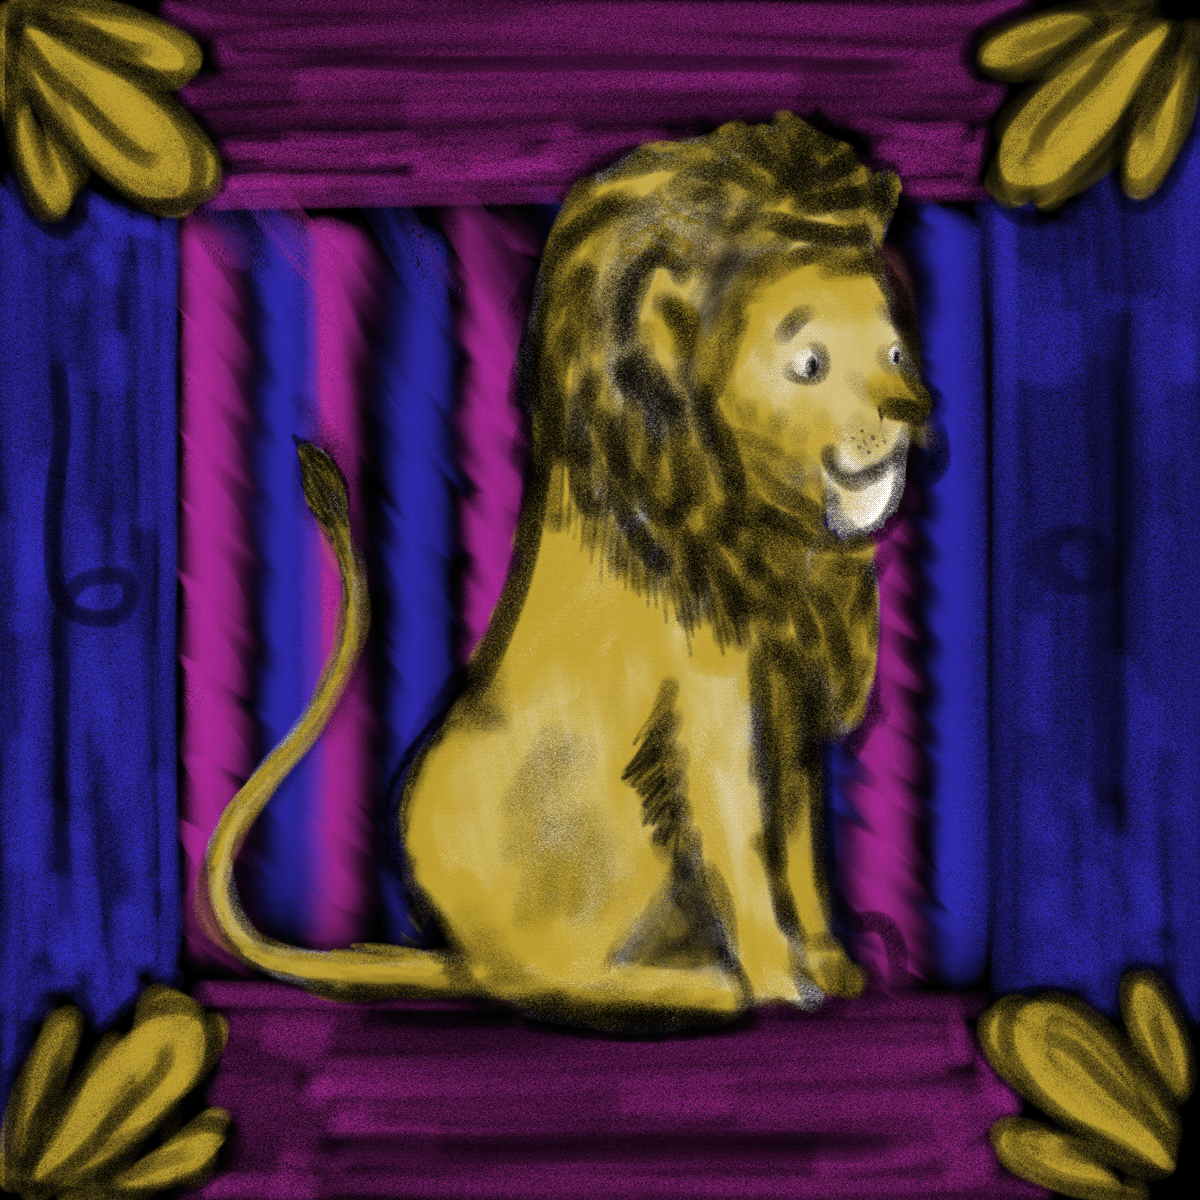 Doodle of a sitting circus lion isolated on colorful background.